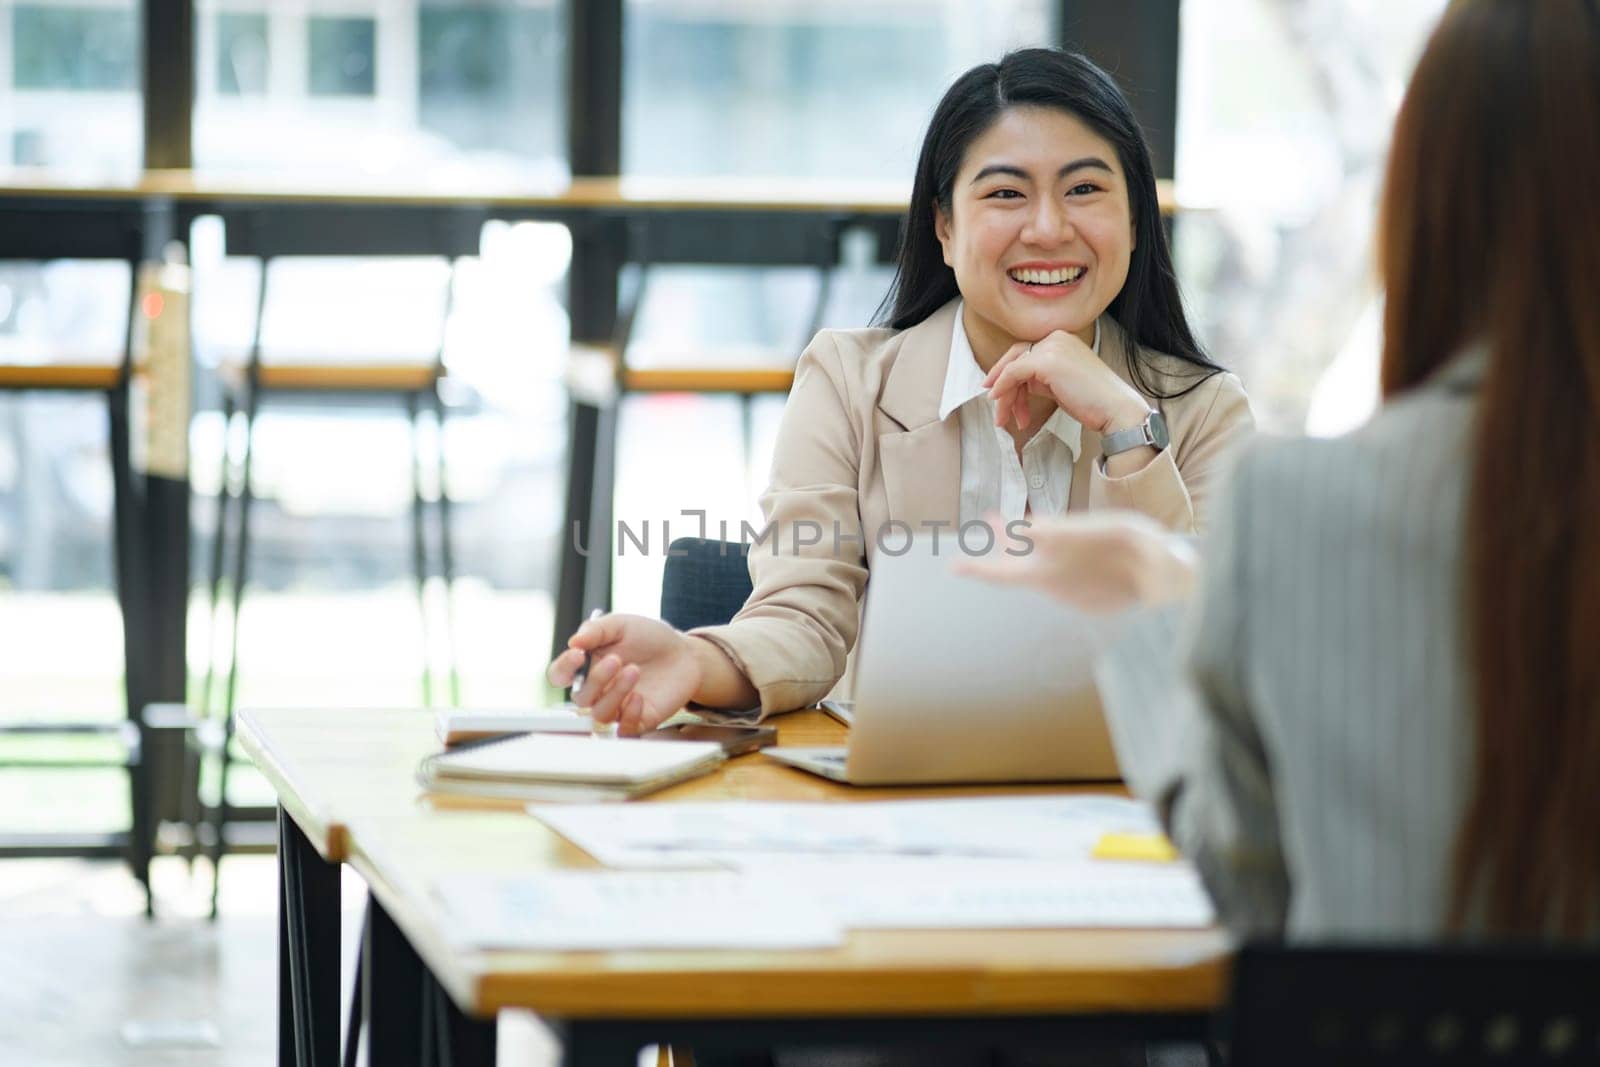 Two business professionals engaged in a serious discussion, possibly conducting a job interview in a modern office environment.